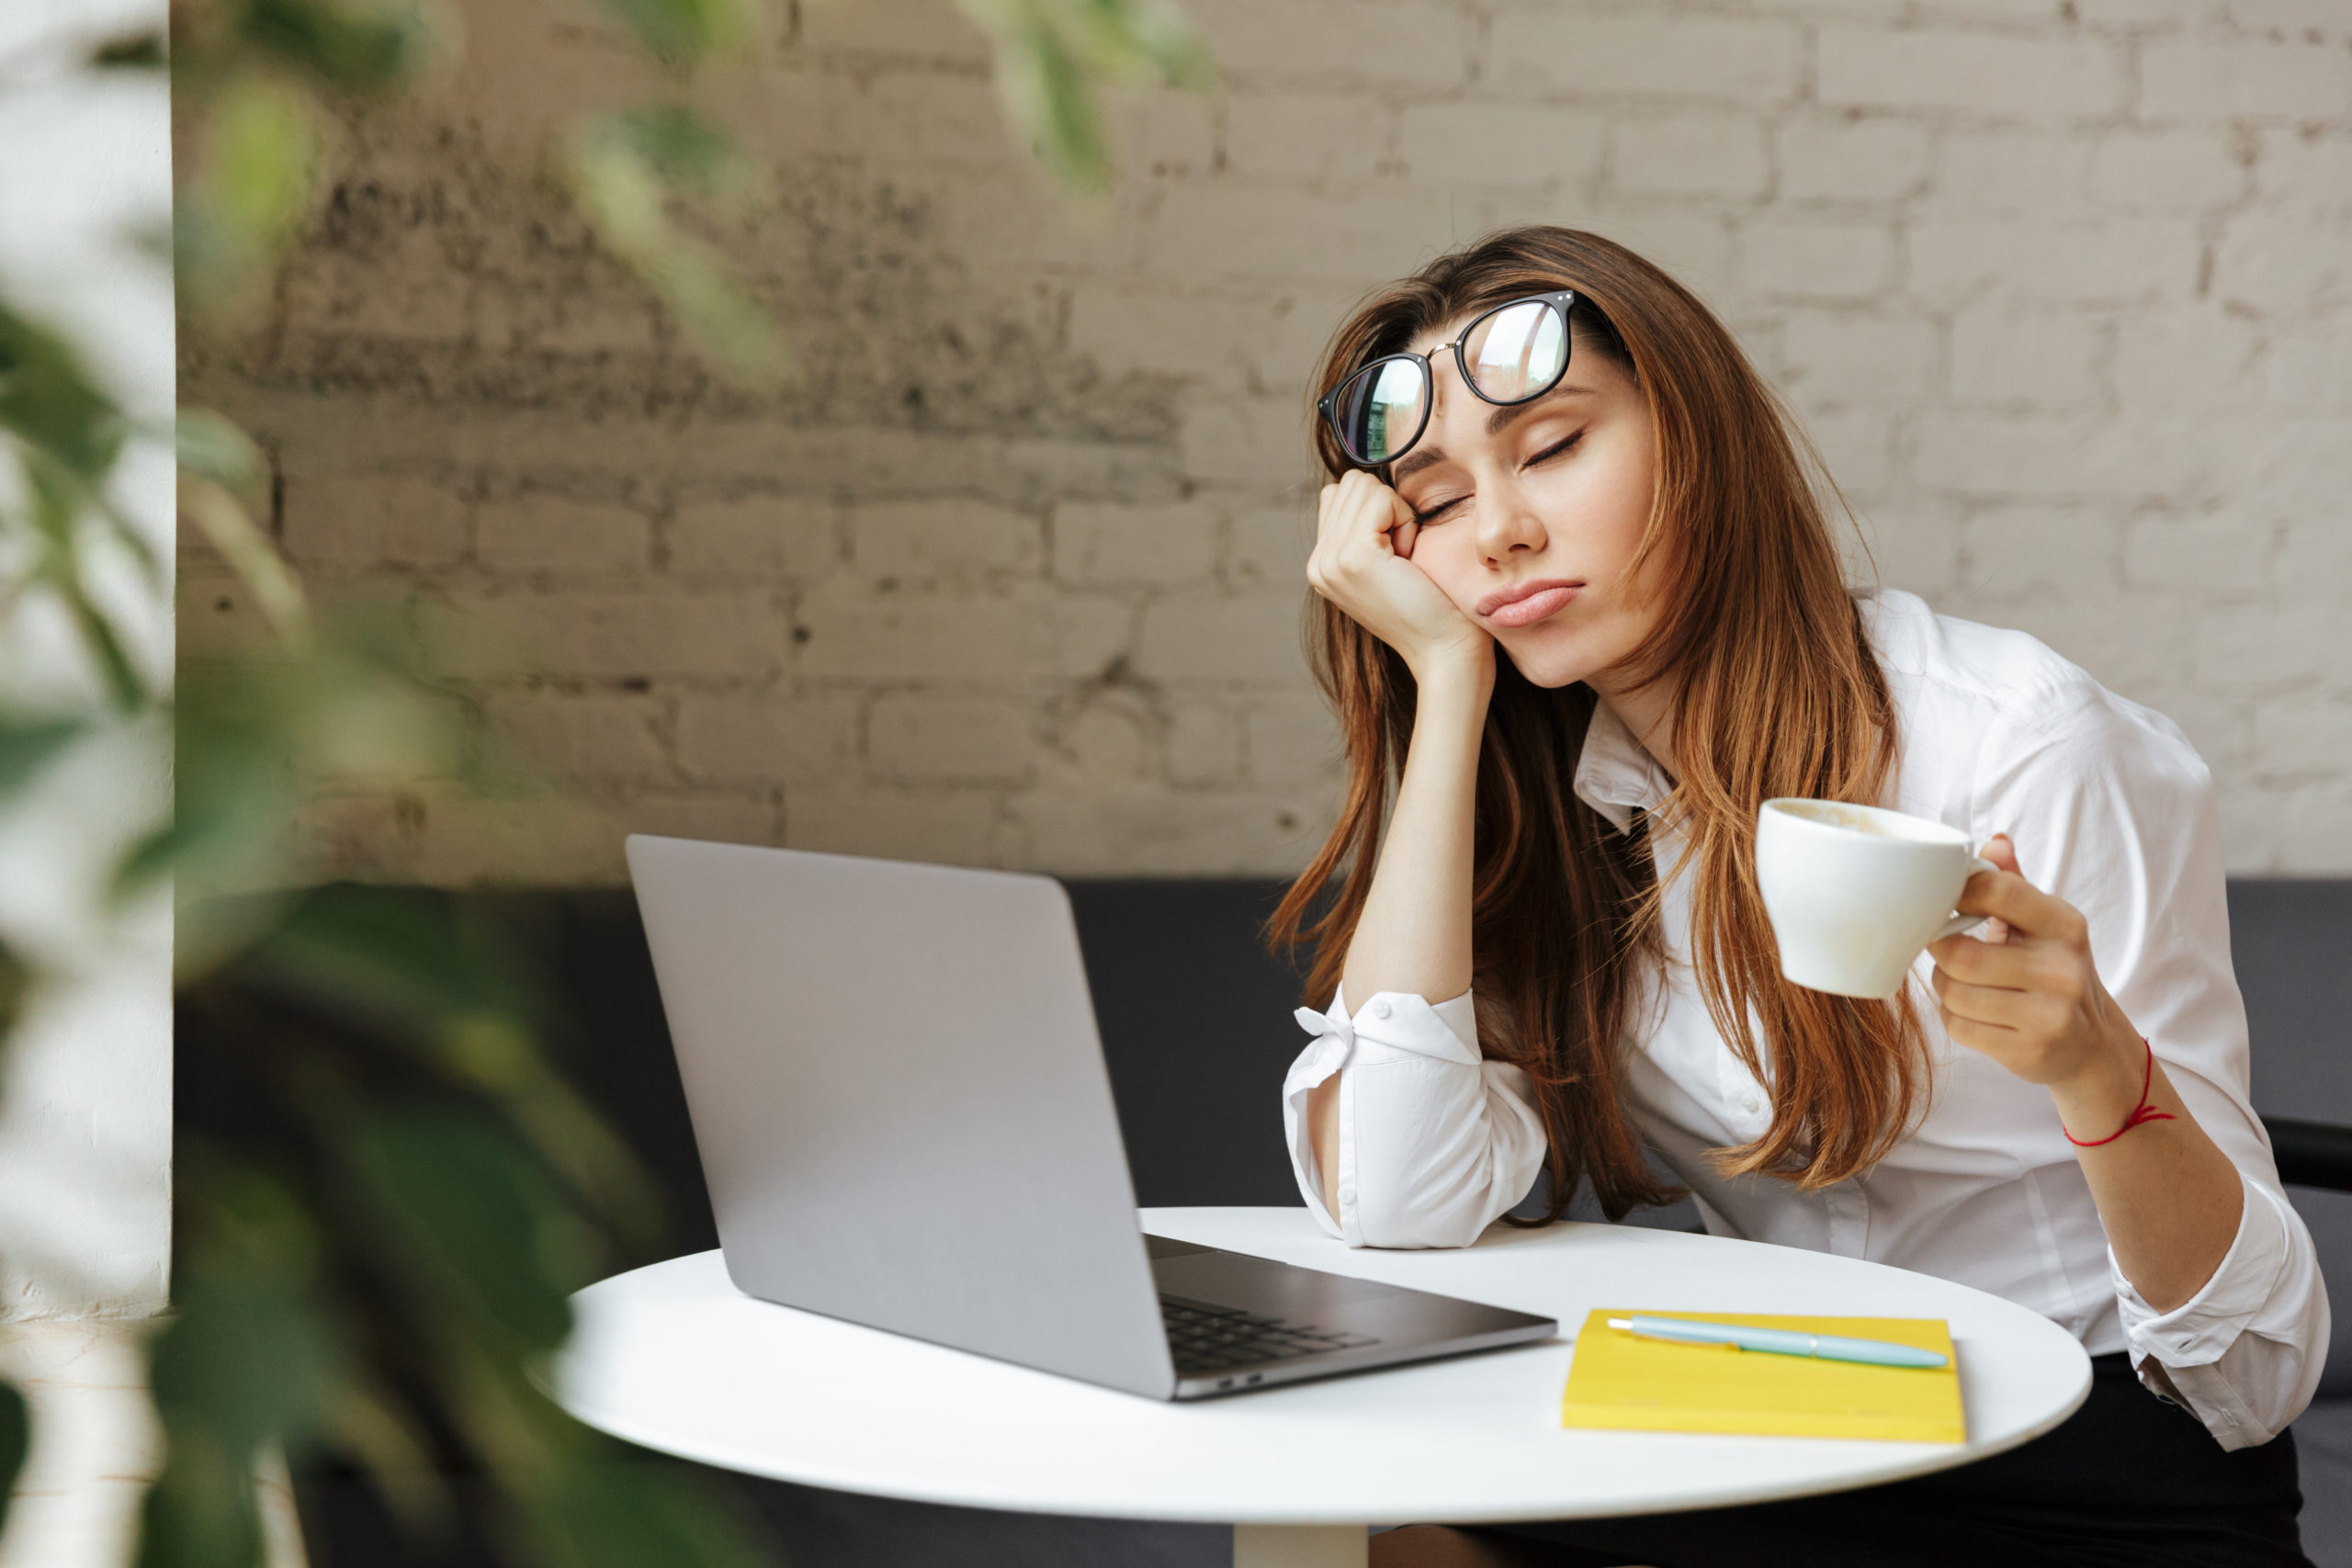 Experts recommend taking a nap after lunch to maintain energy levels rather than relying                               on coffee to get through the day